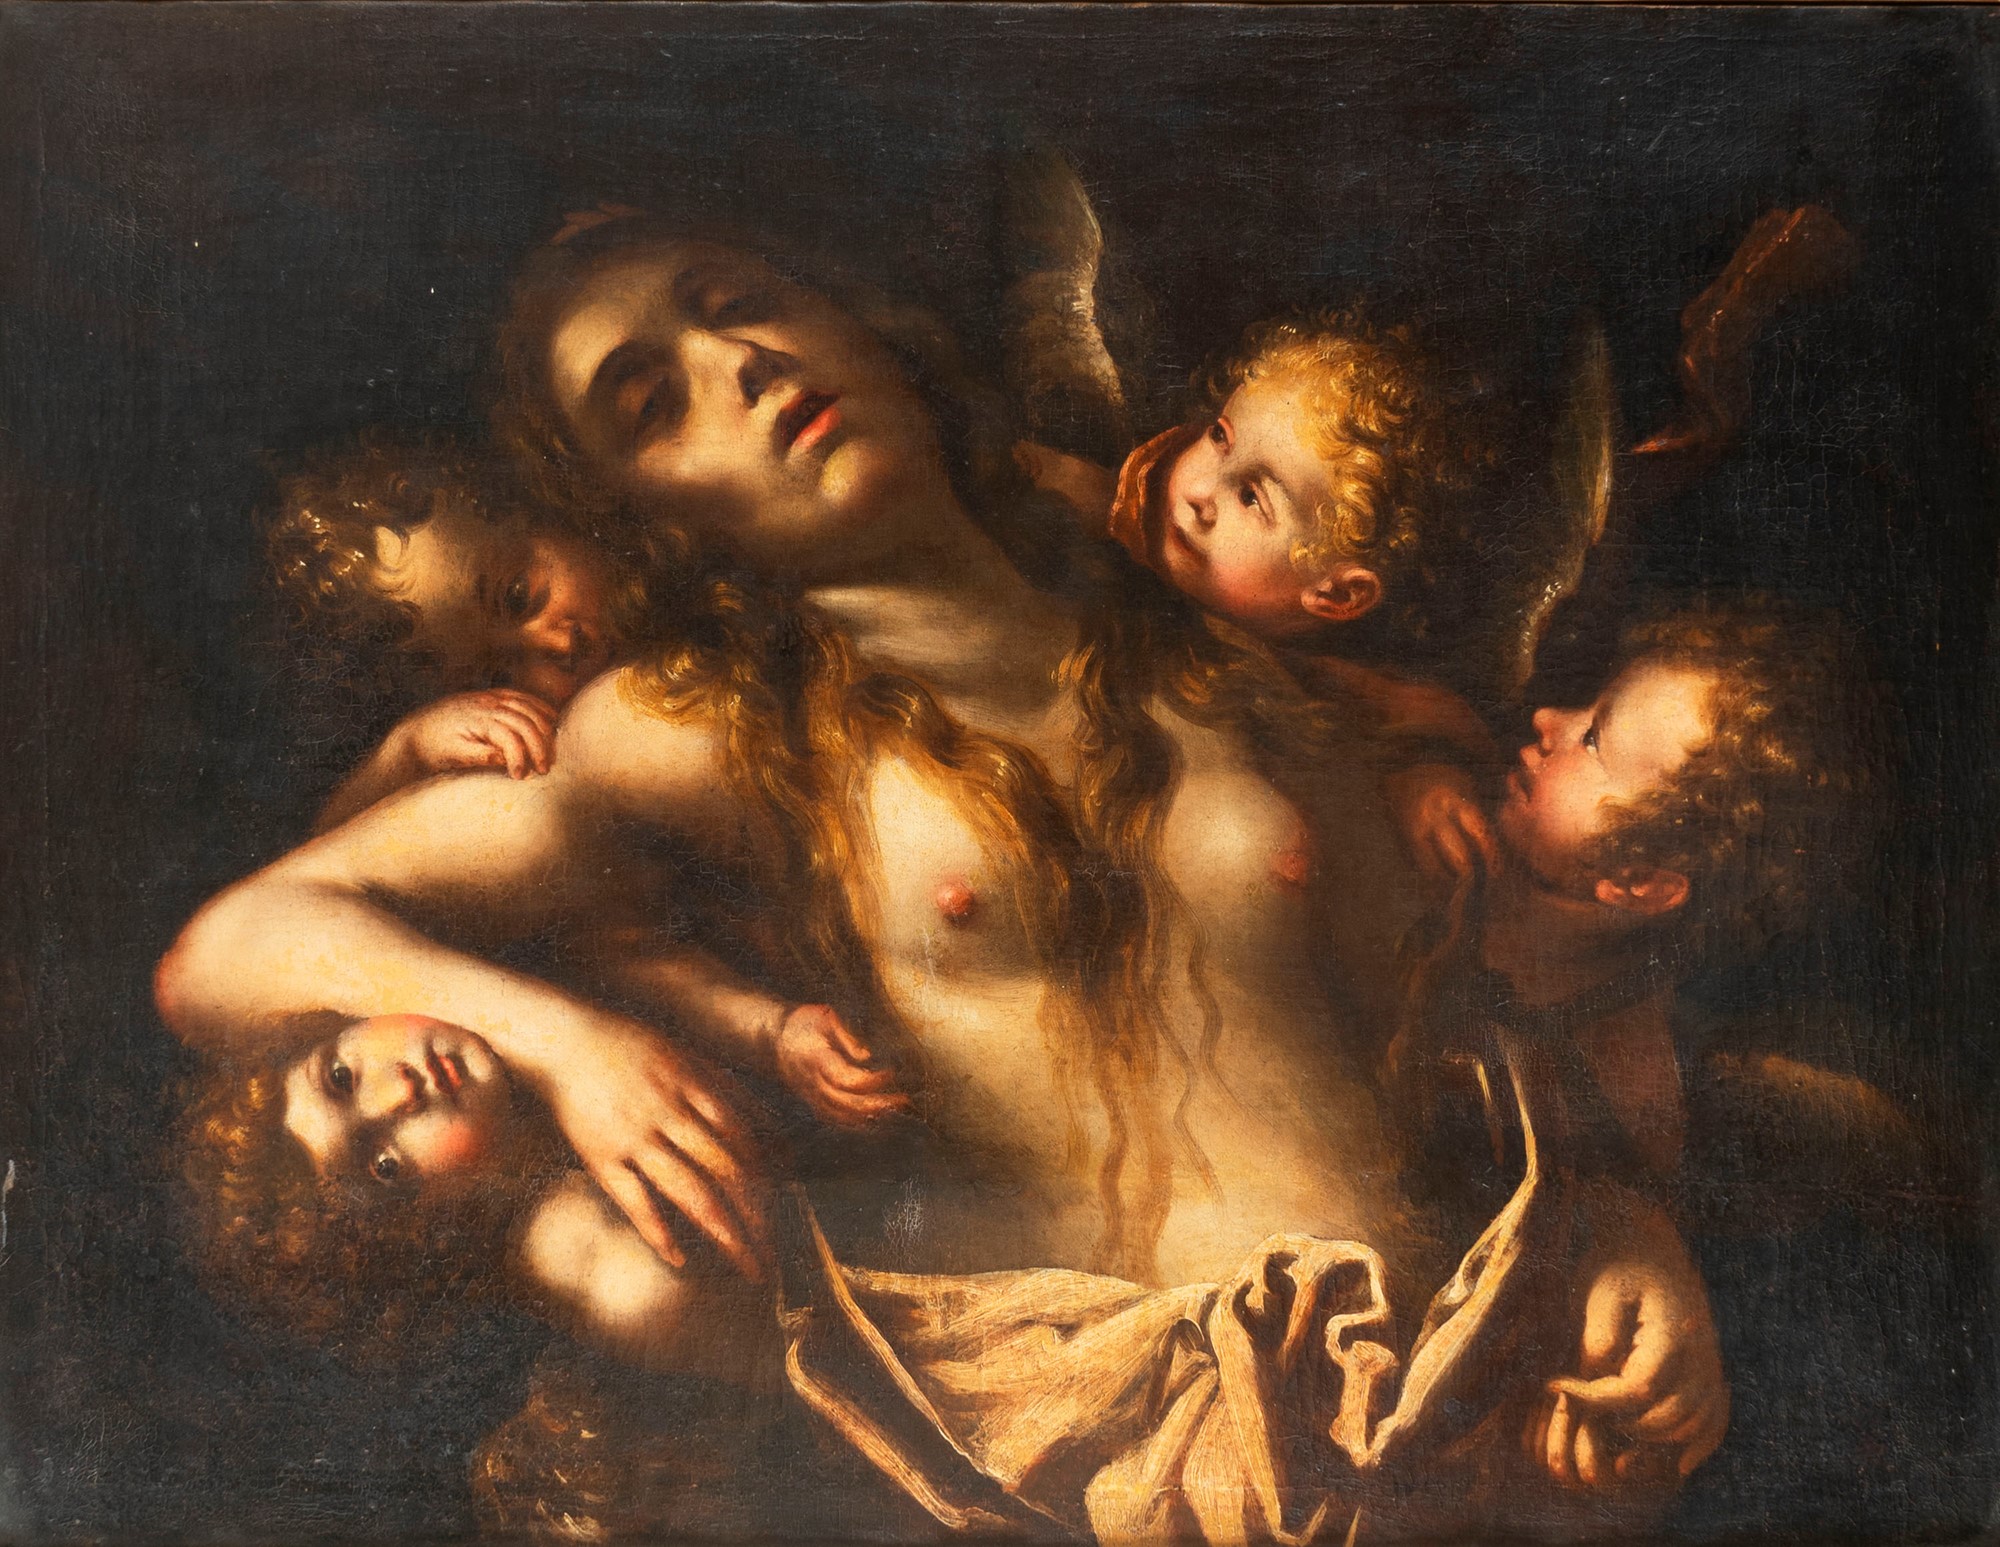 Lombard School, XVII century - Magdalene in ecstasy supported by angels